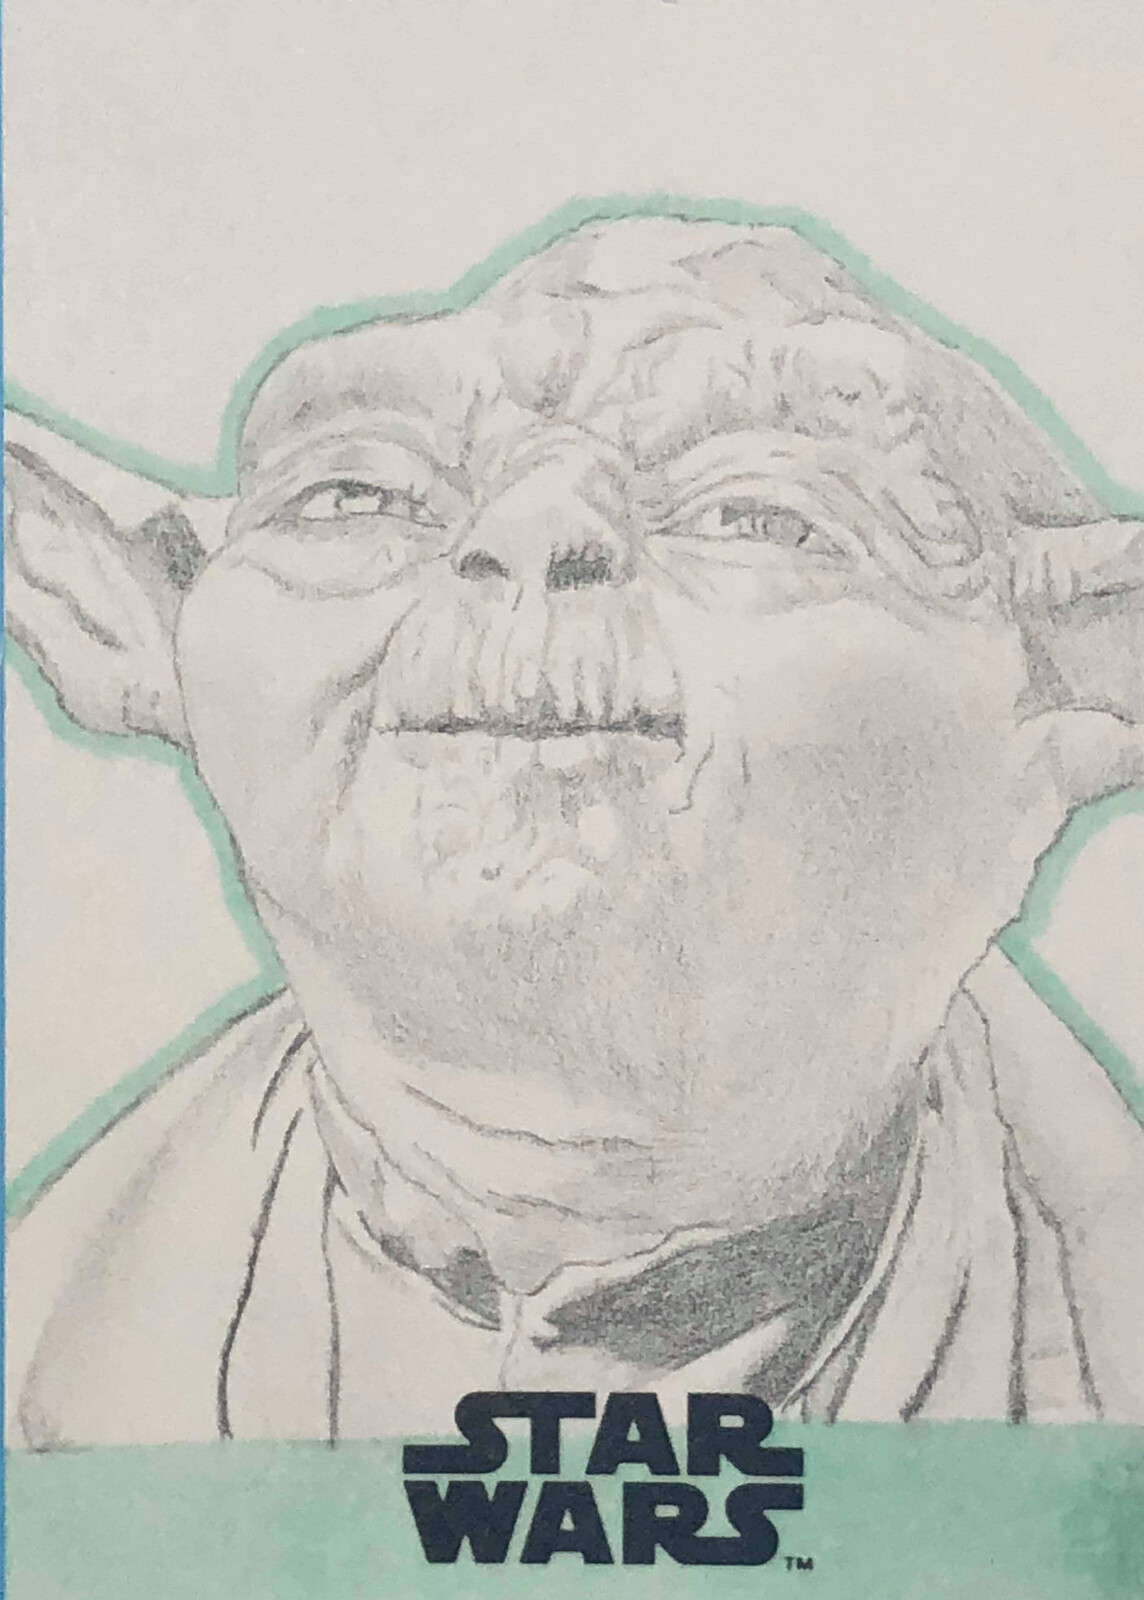 Yoda's force ghost from The Last Jedi